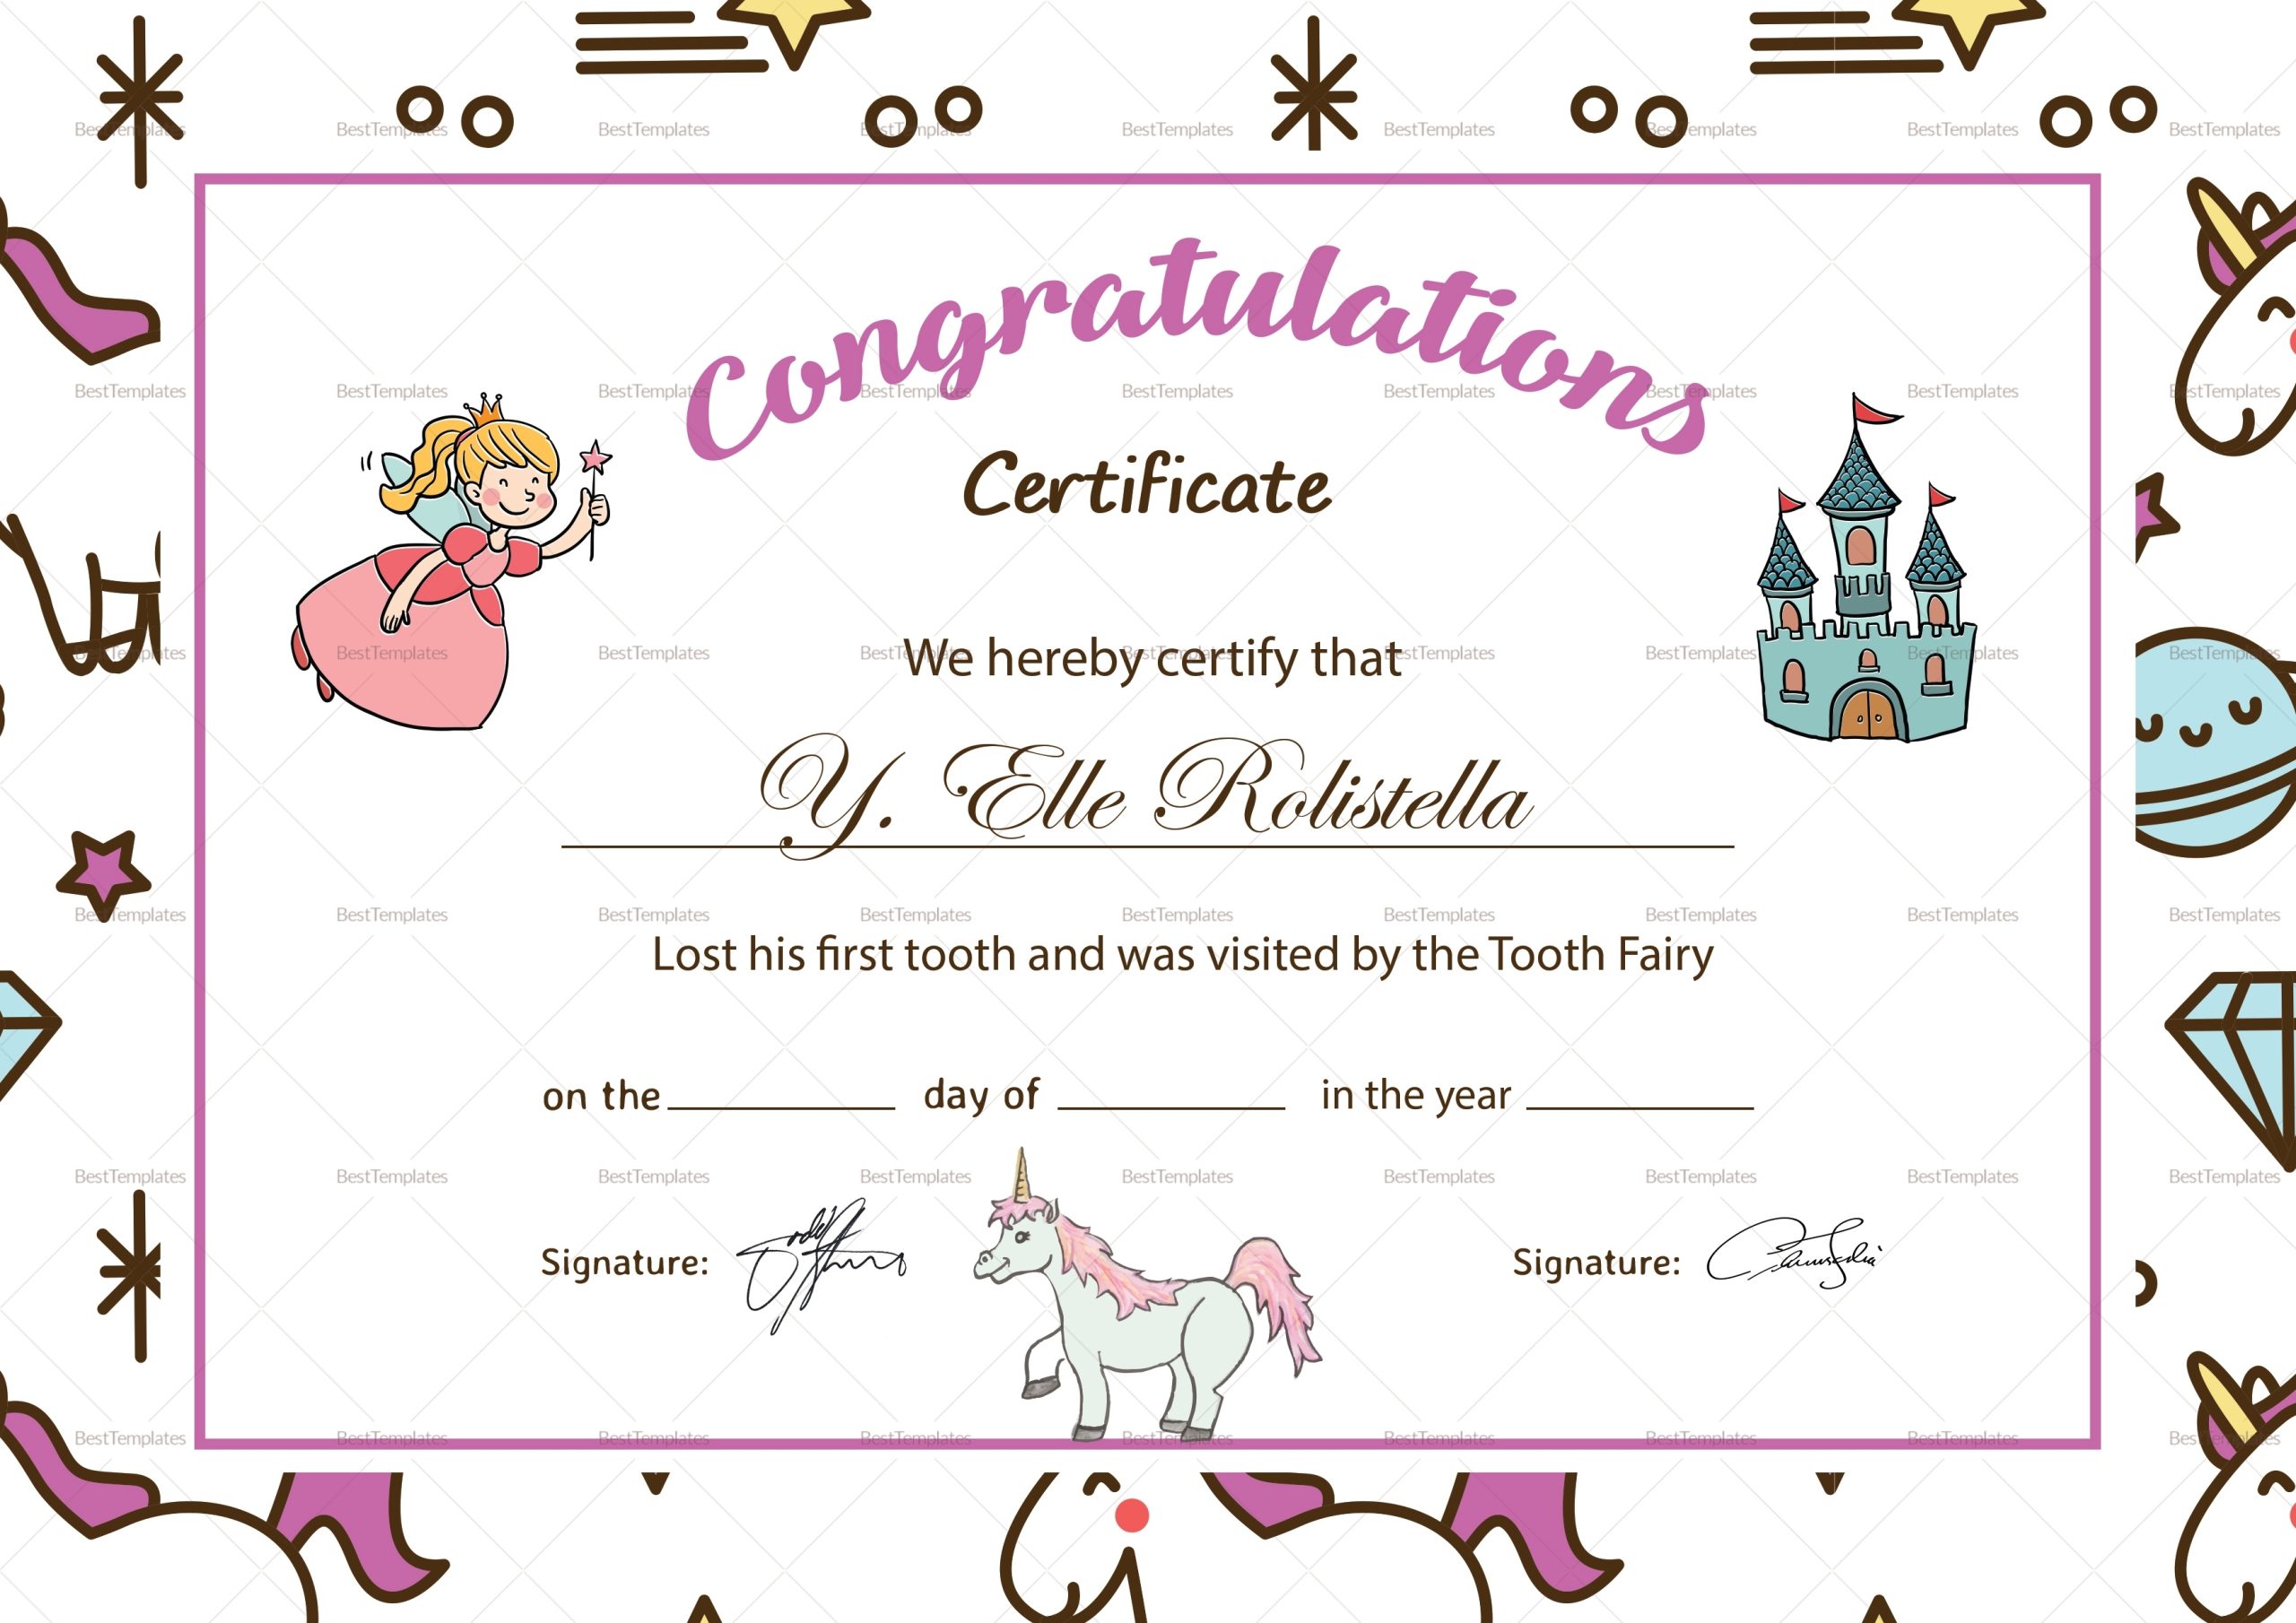 Tooth Fairy Congratulation Certificate Design Template In Psd, Word with regard to Congratulations Certificate Word Template